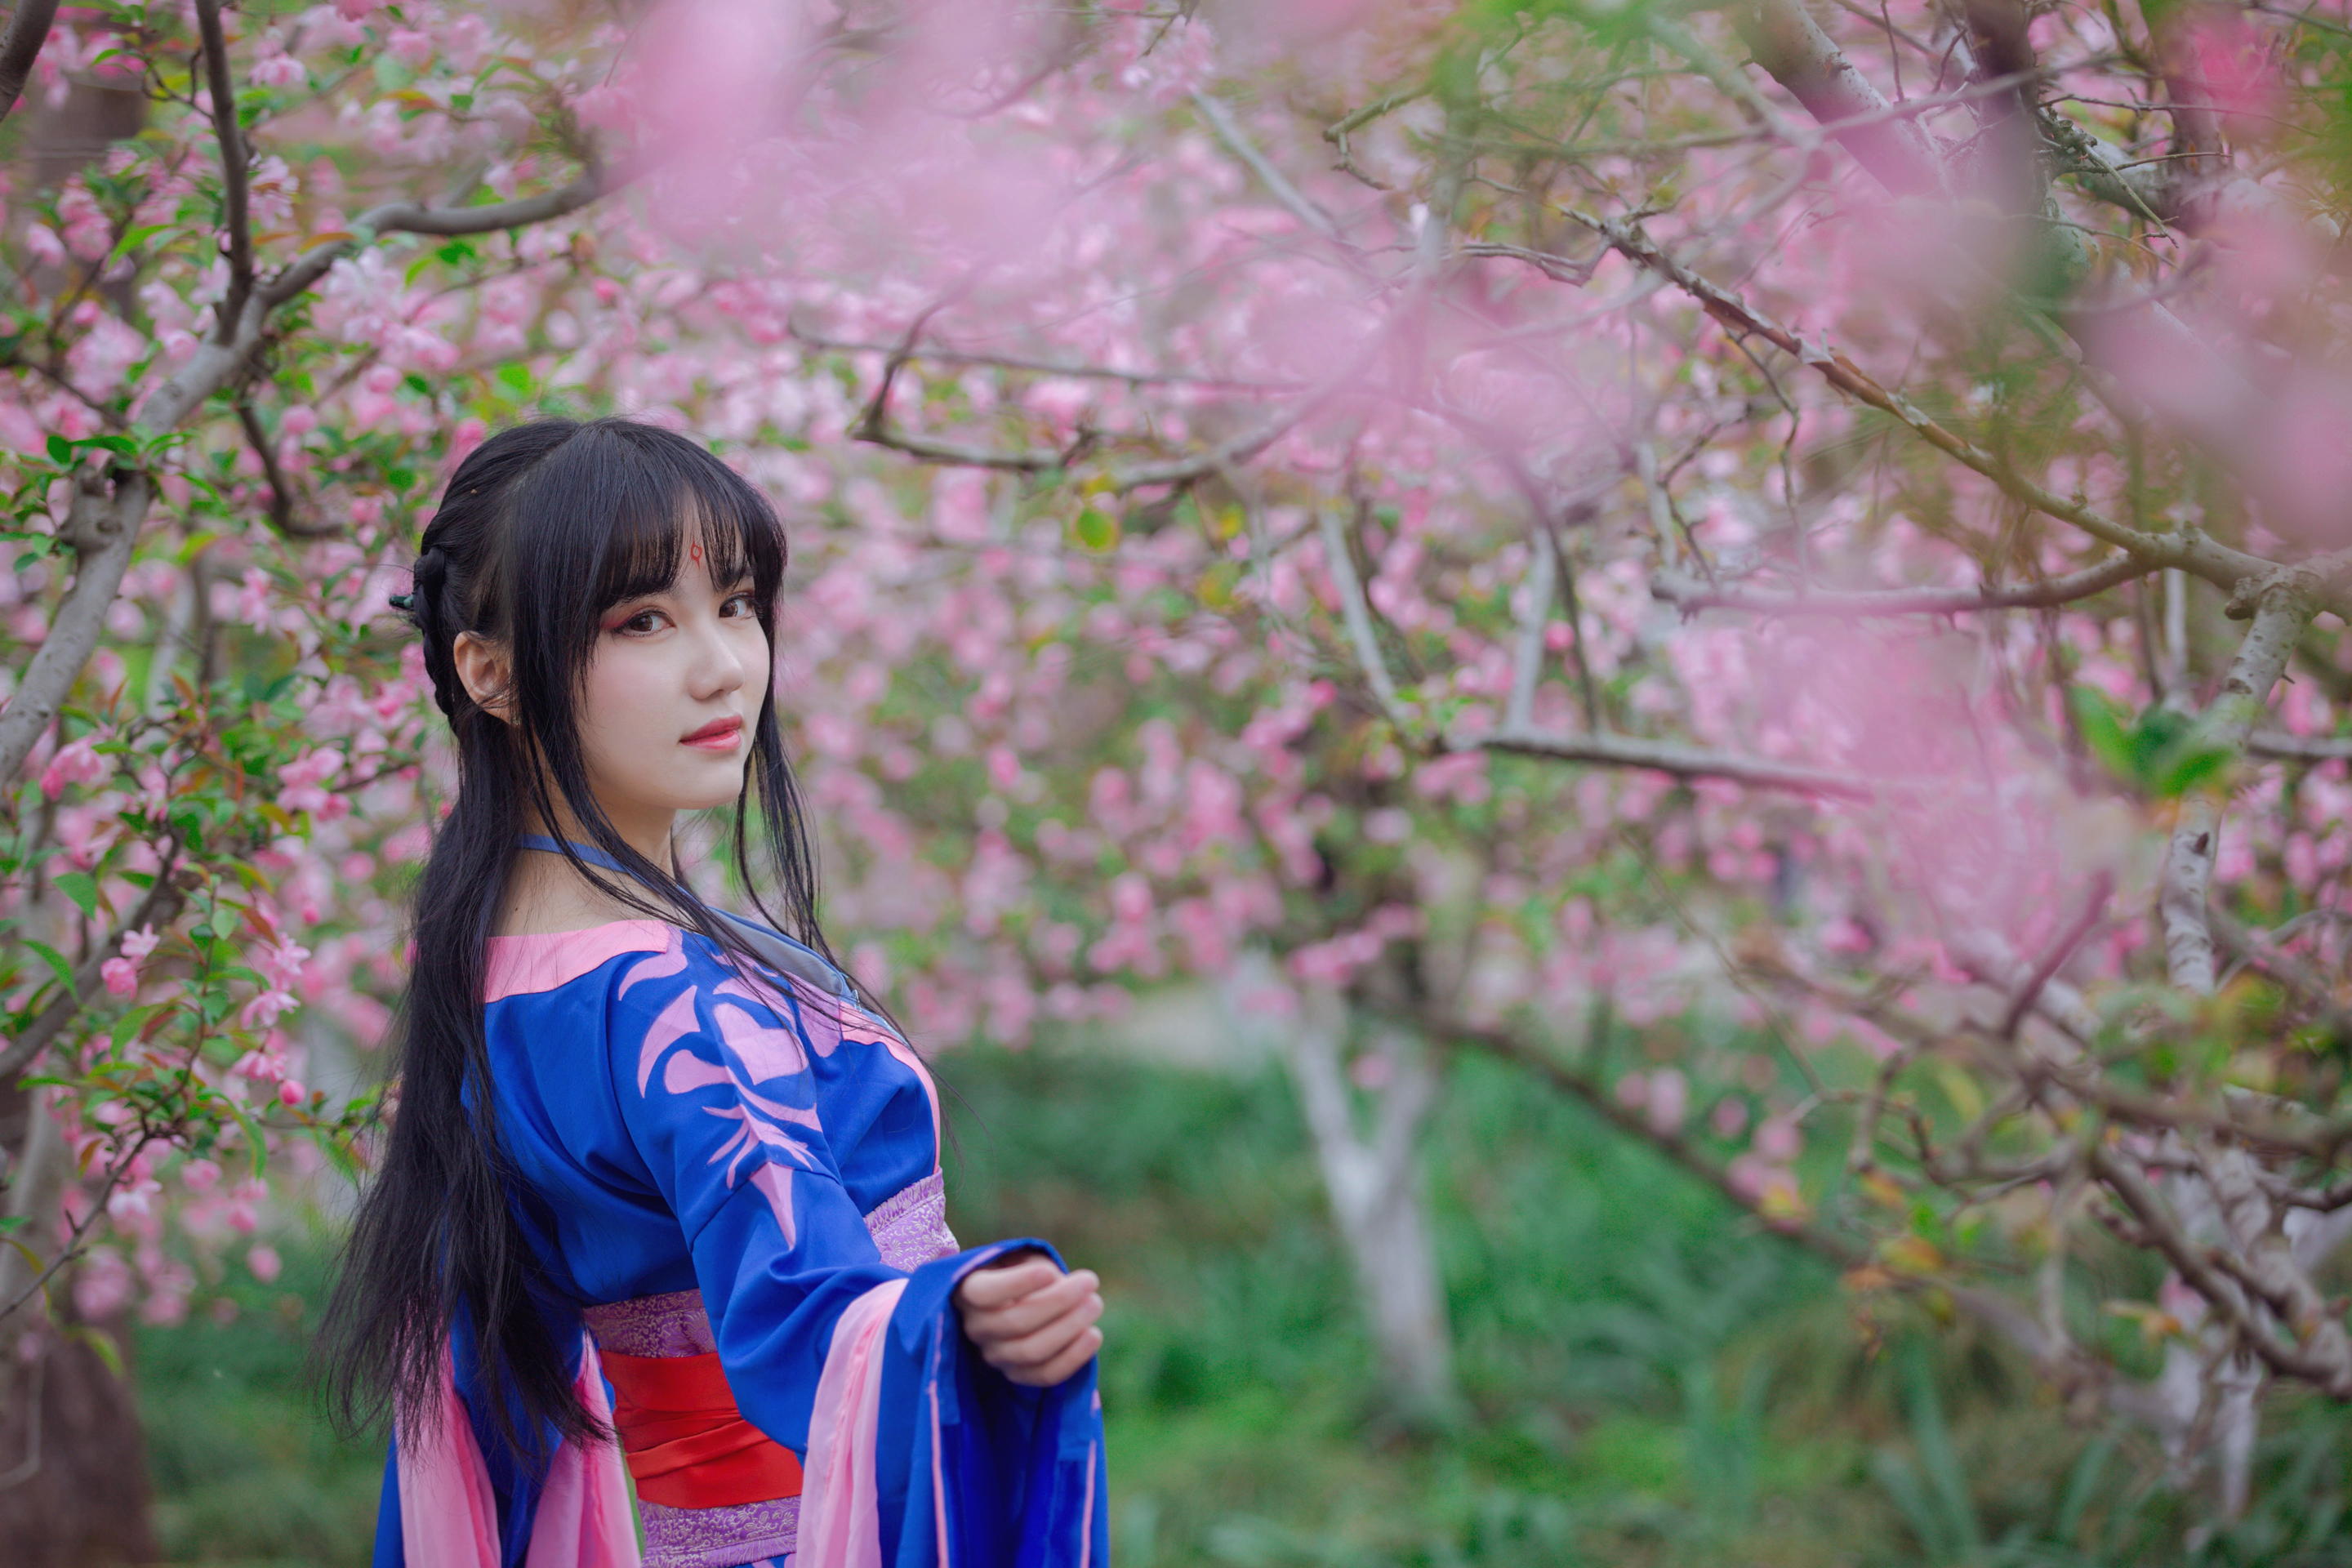 People 2880x1920 Asian model women long hair dark hair cherry blossom trees traditional clothing ponytail depth of field grass branch leaves petals flowers women outdoors spring